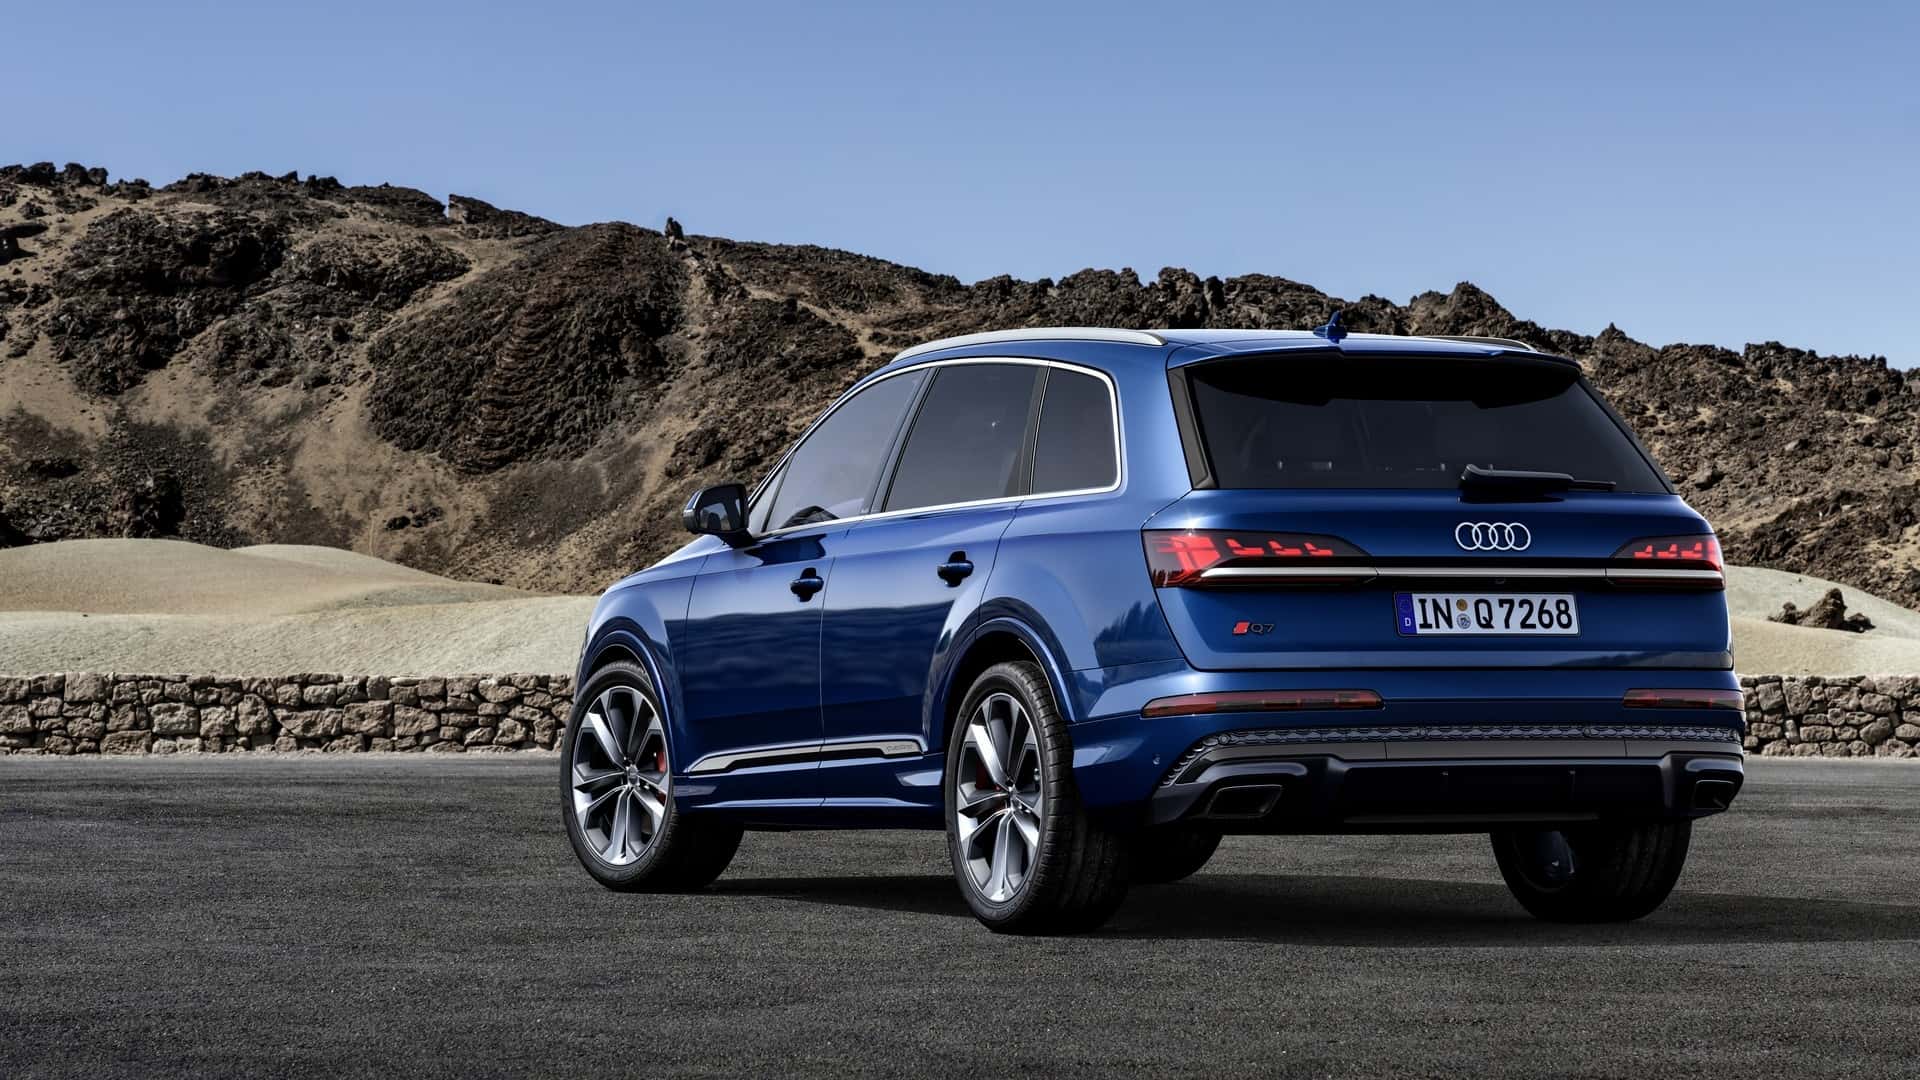 Check Out the Redesigned Audi Q7 with Powerful 3.0T Engine and Upgraded Interior